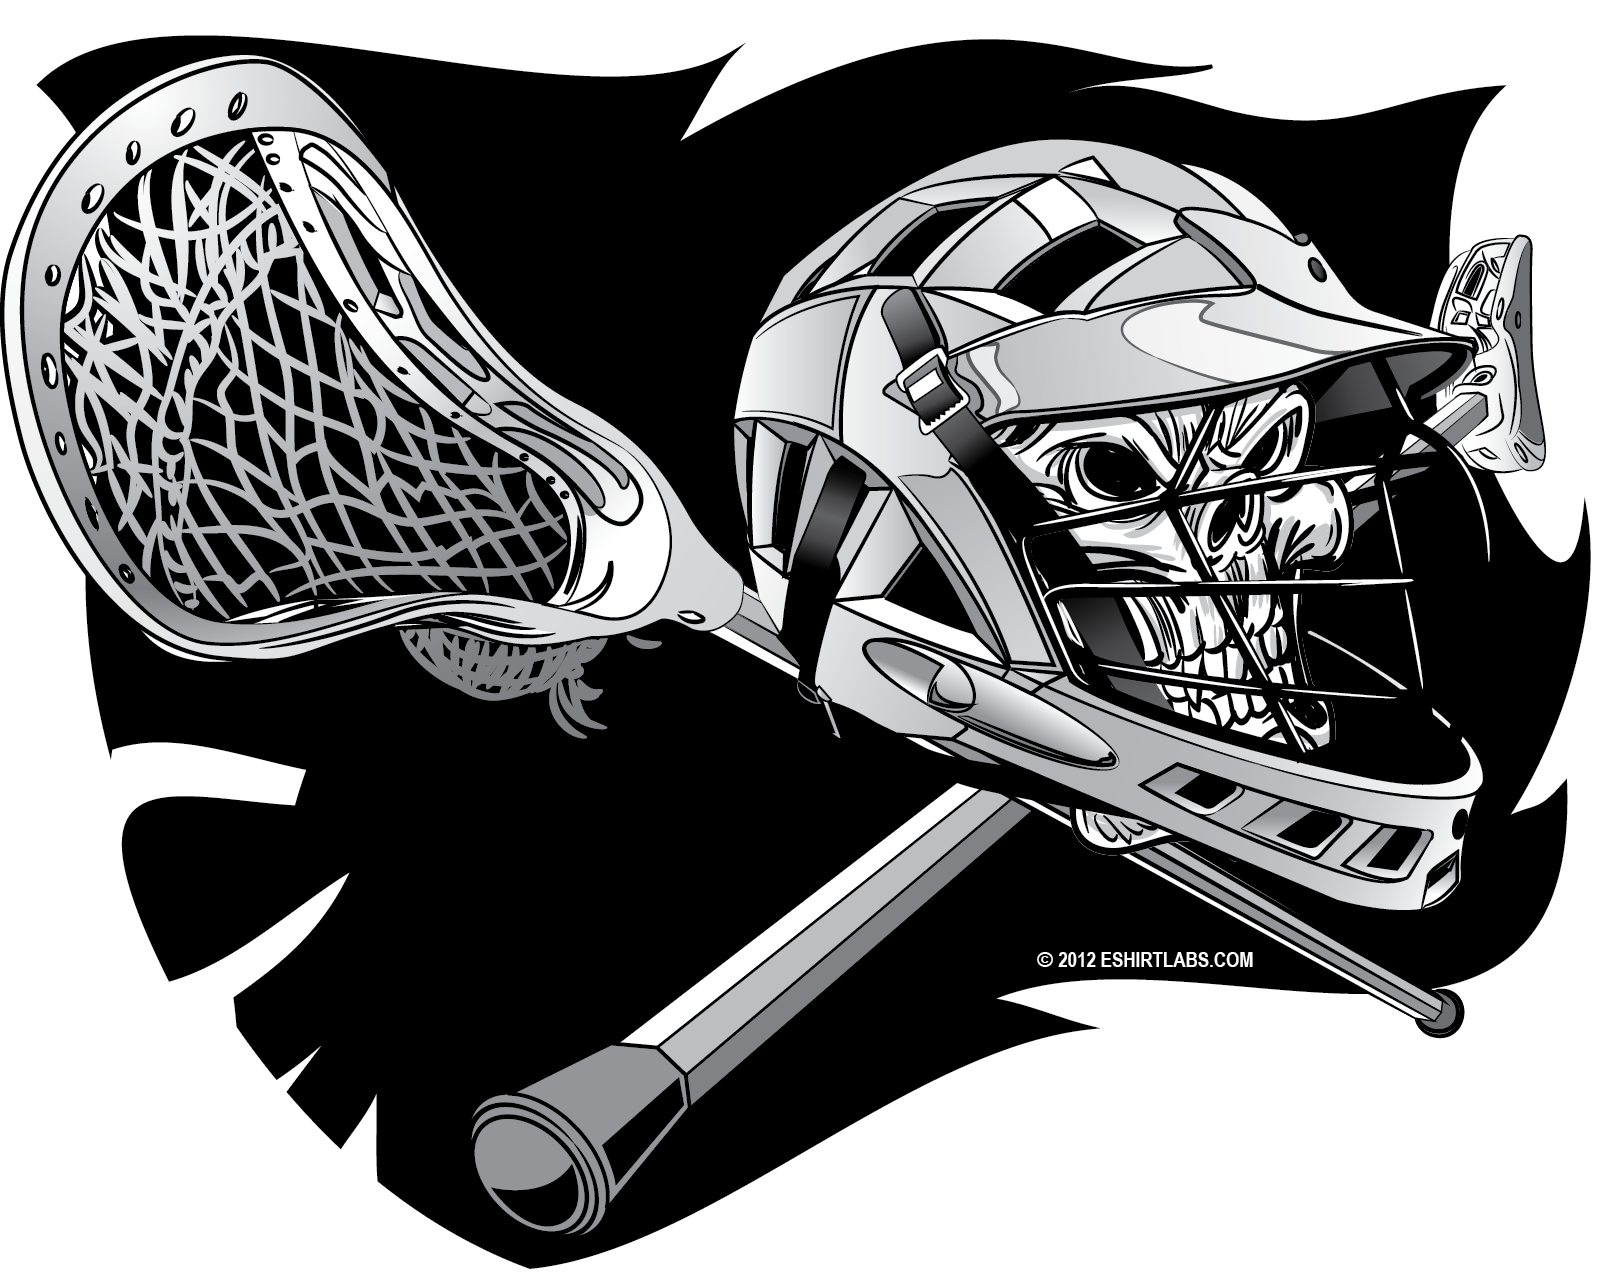 Clip Arts Related To : womens lacrosse sticks clip art. 